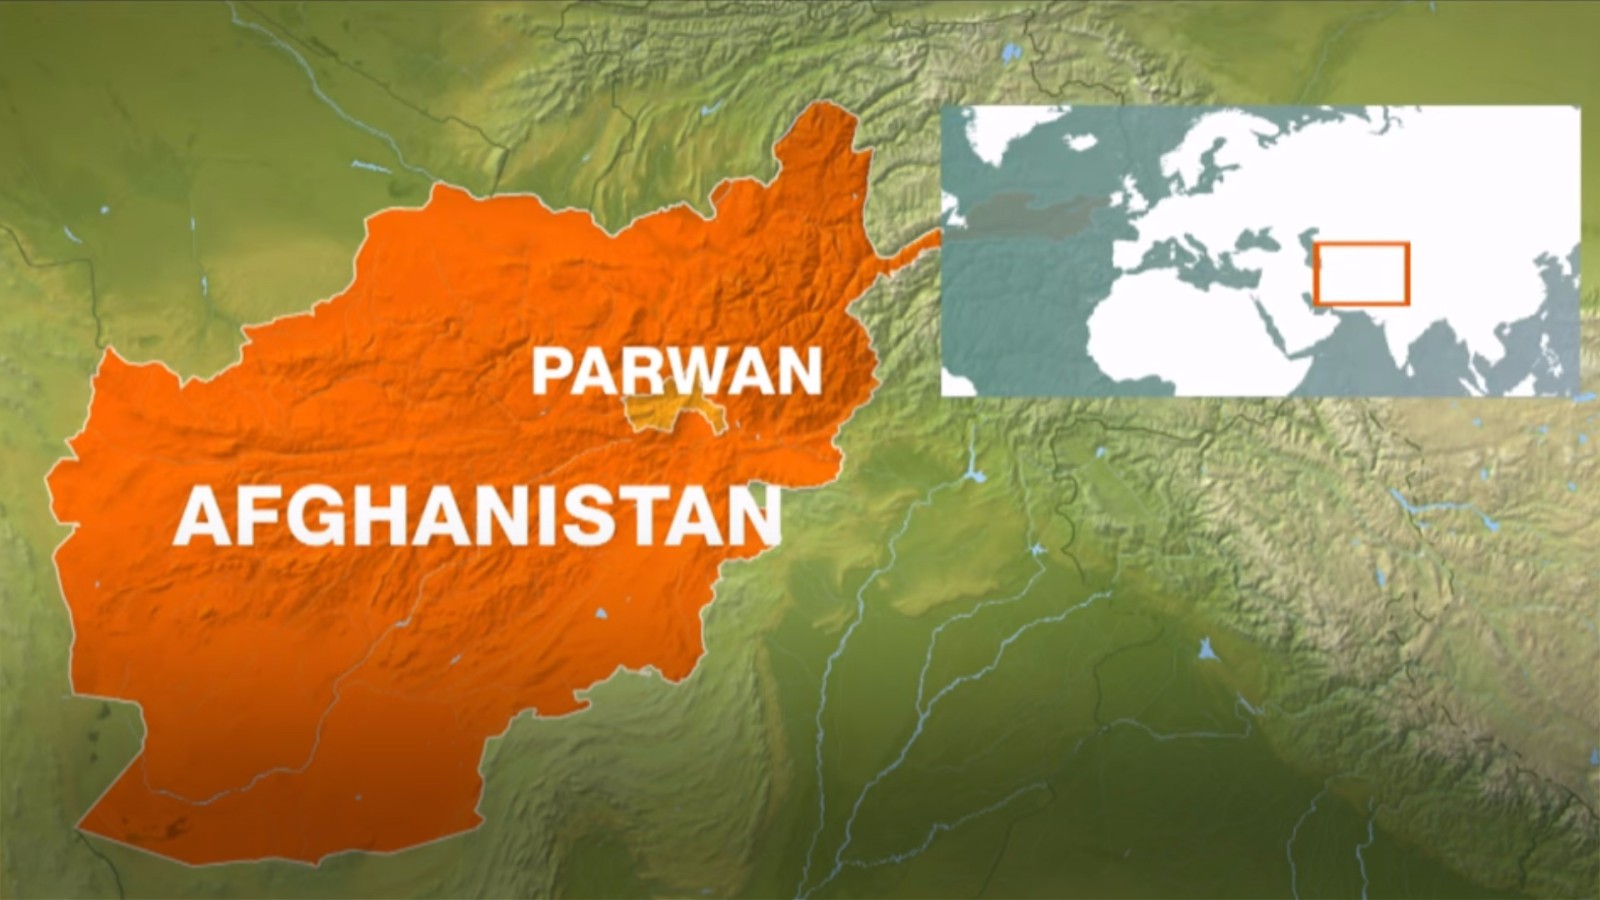 Burst! At least 24 people were killed in an explosion near a presidential rally in Afghanistan